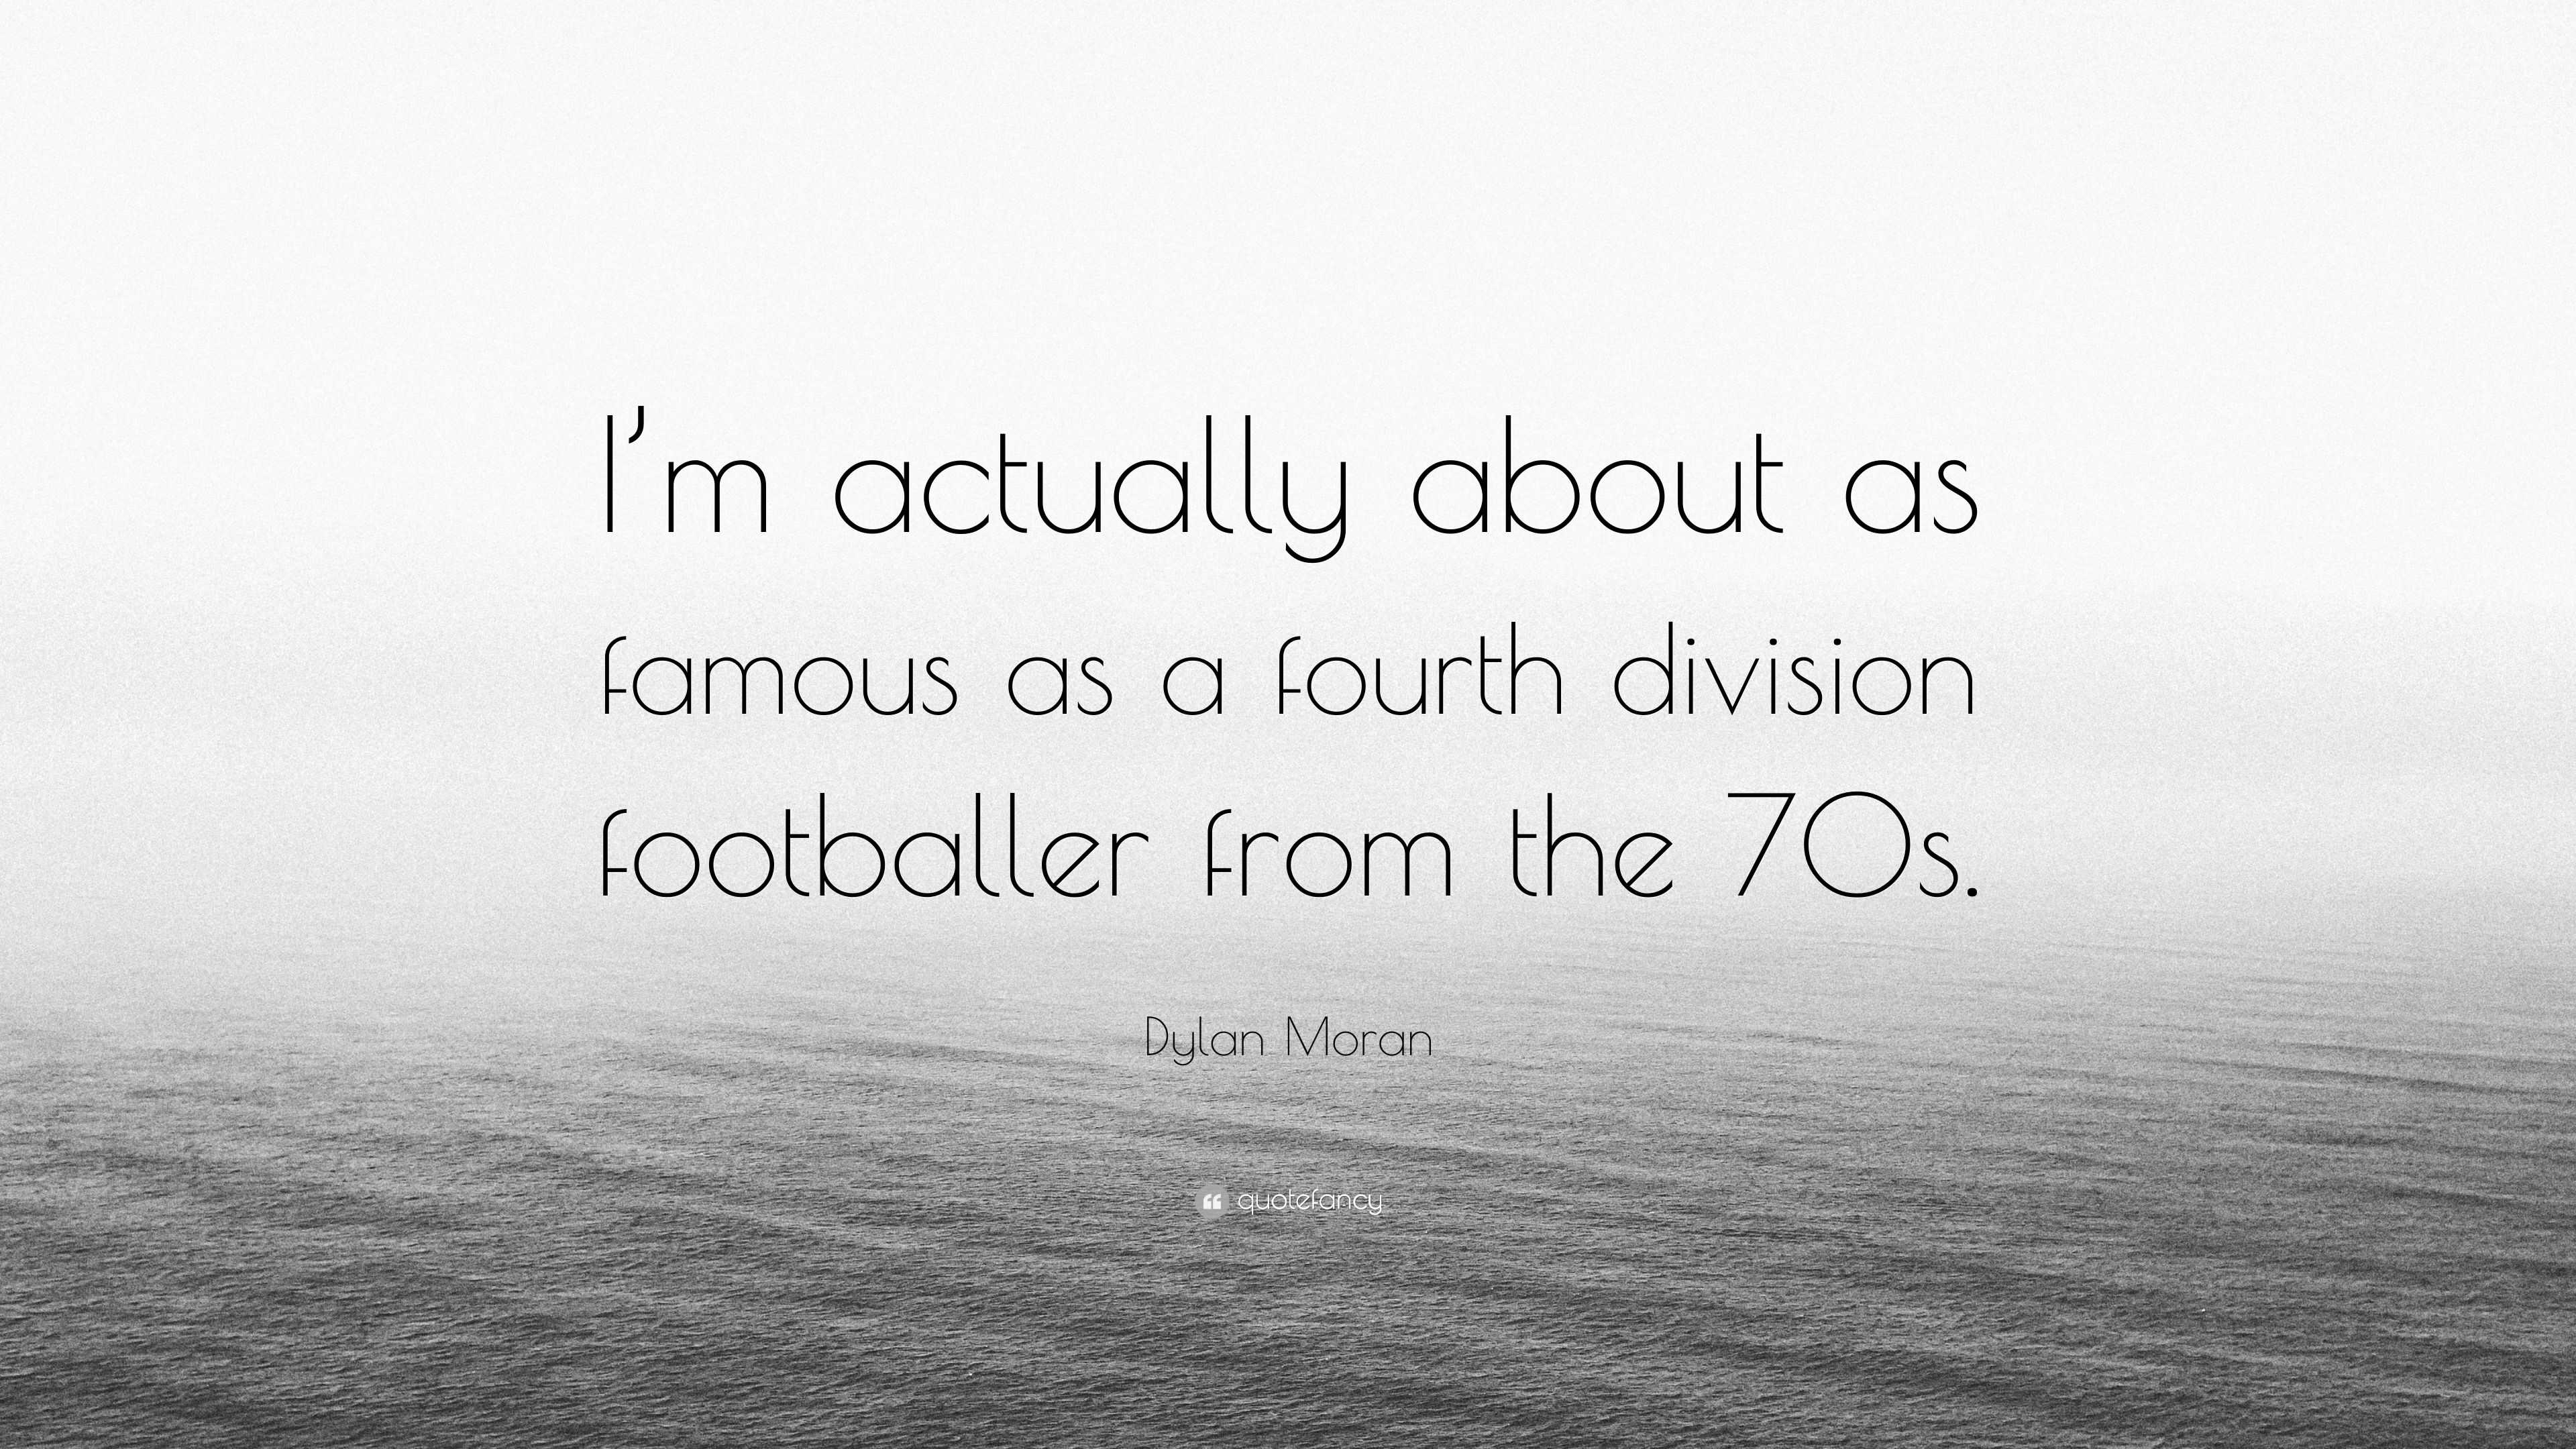 Dylan Moran Quote: “I’m actually about as famous as a fourth division